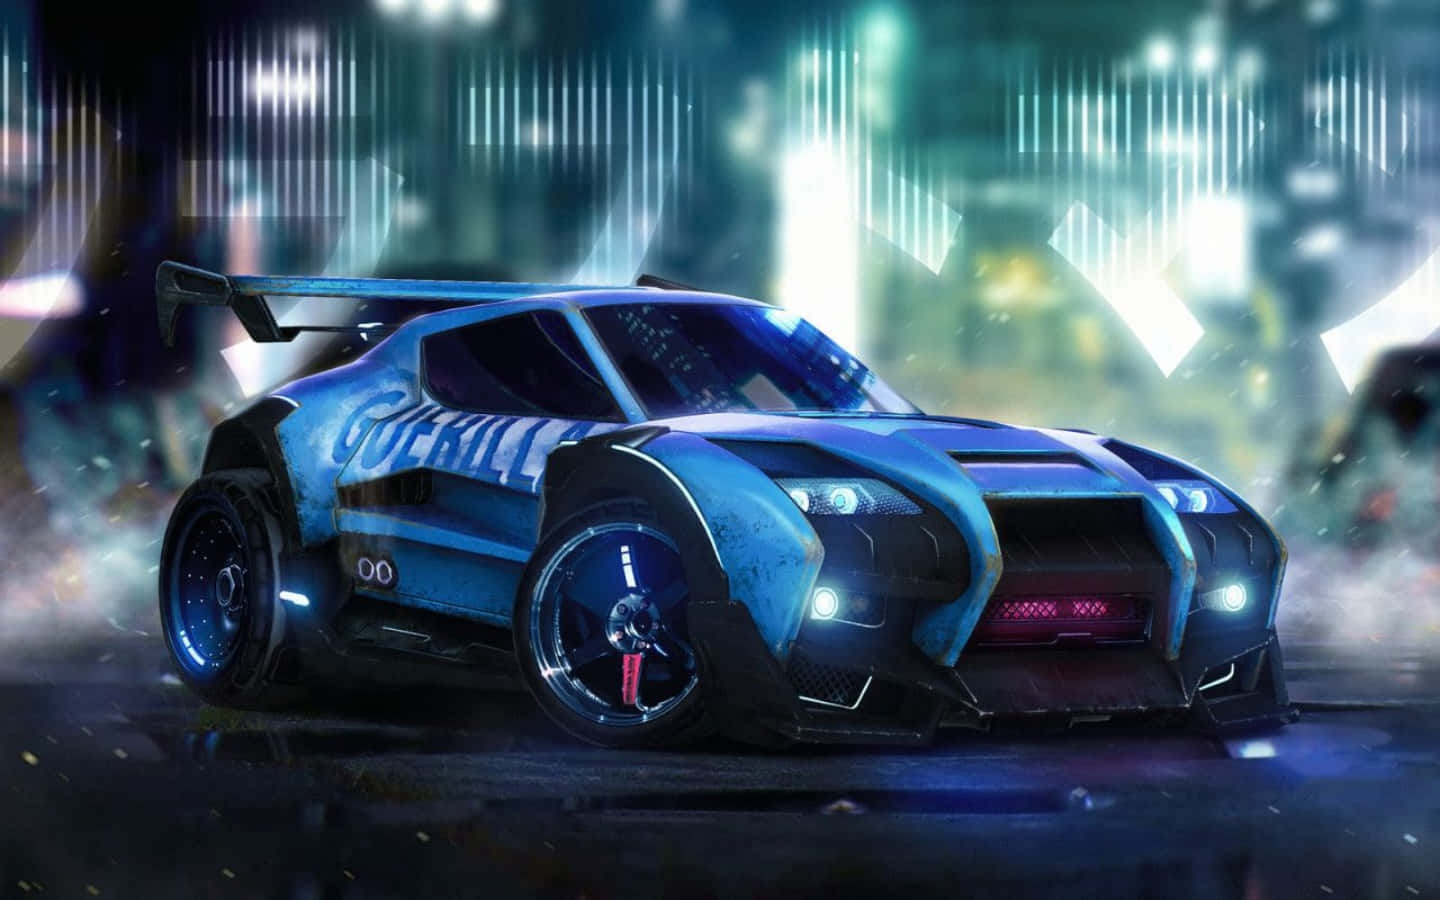 Get Ready for Speed and Power with Rocket League Desktop Wallpaper